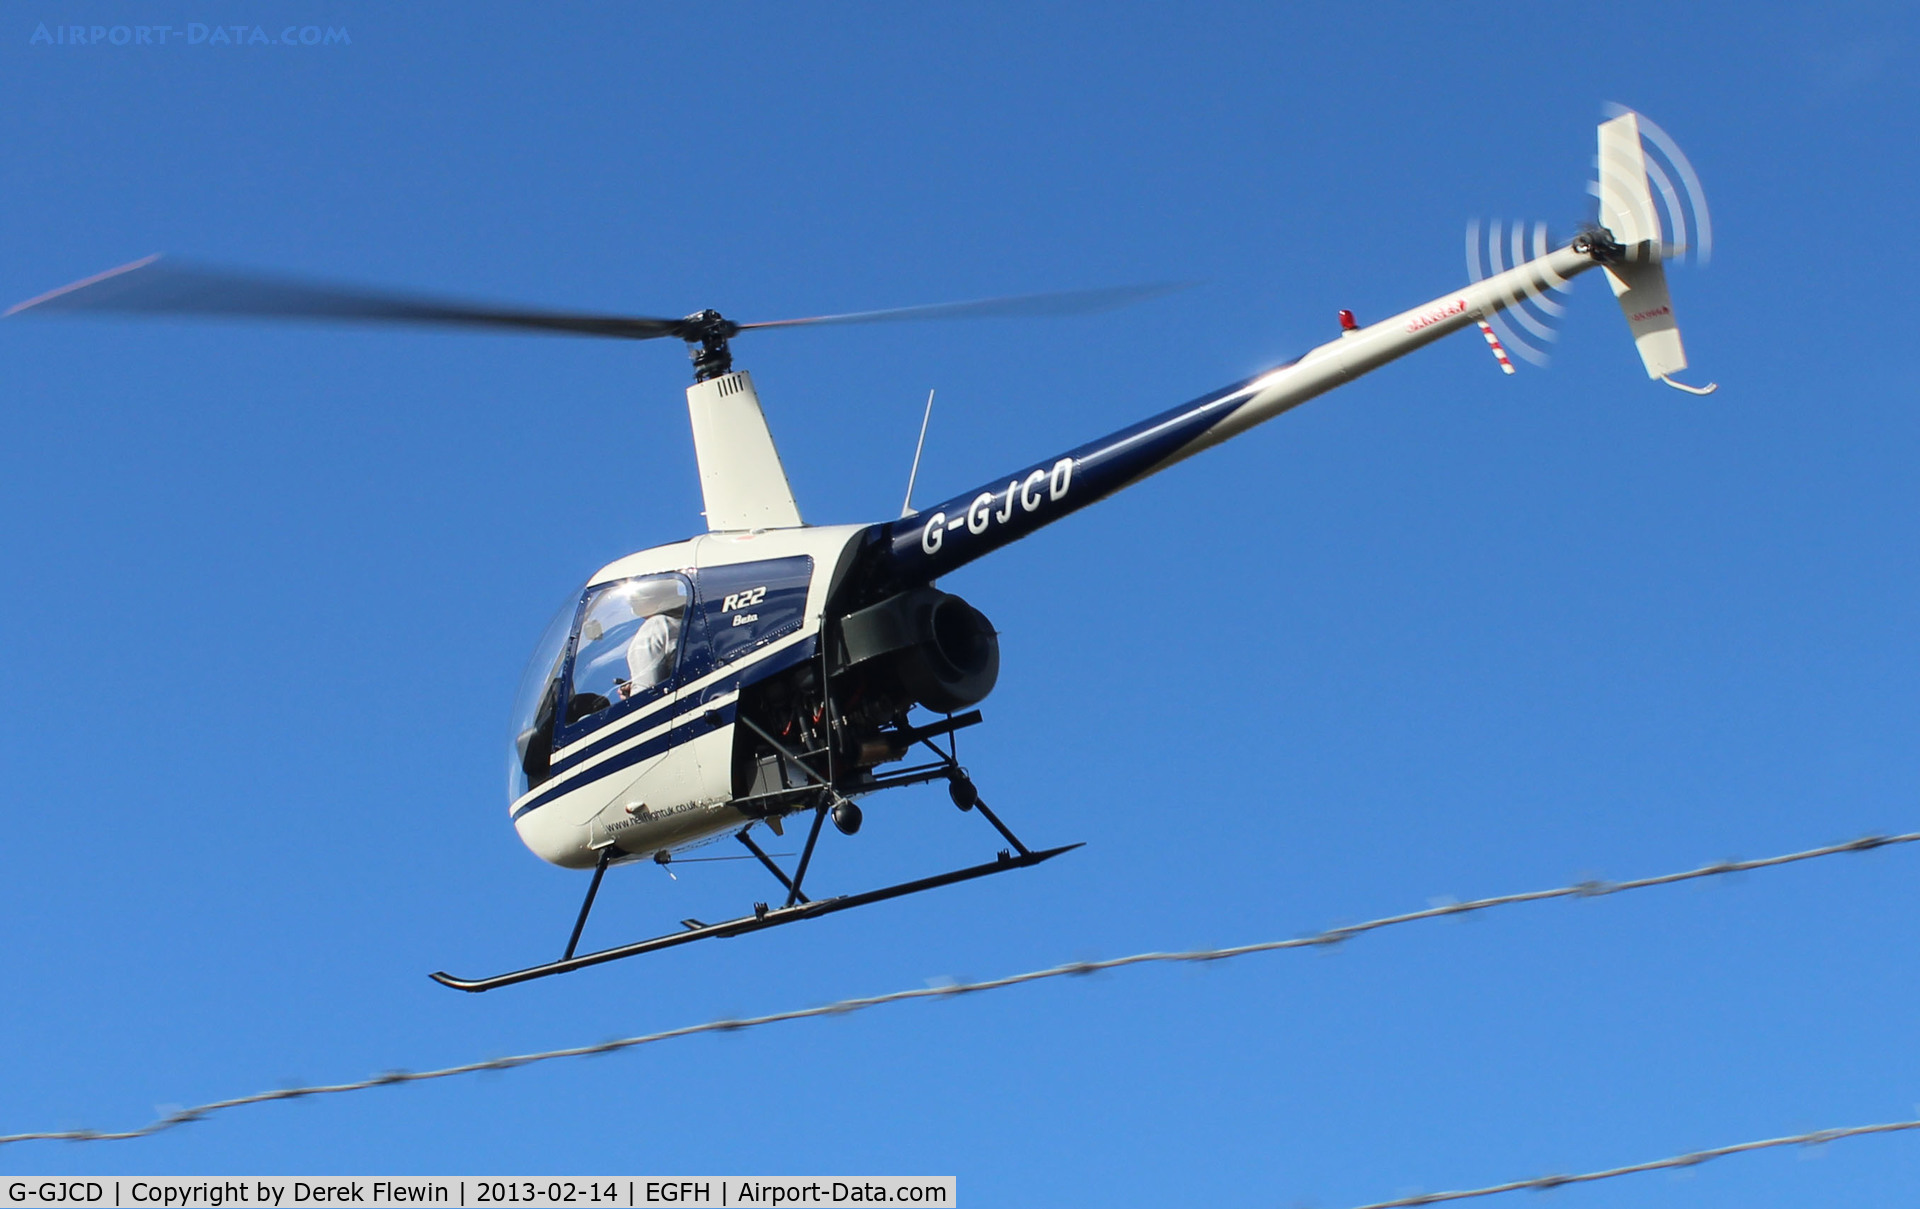 G-GJCD, 1989 Robinson R22 Beta C/N 0966, Going to shut down after local training.